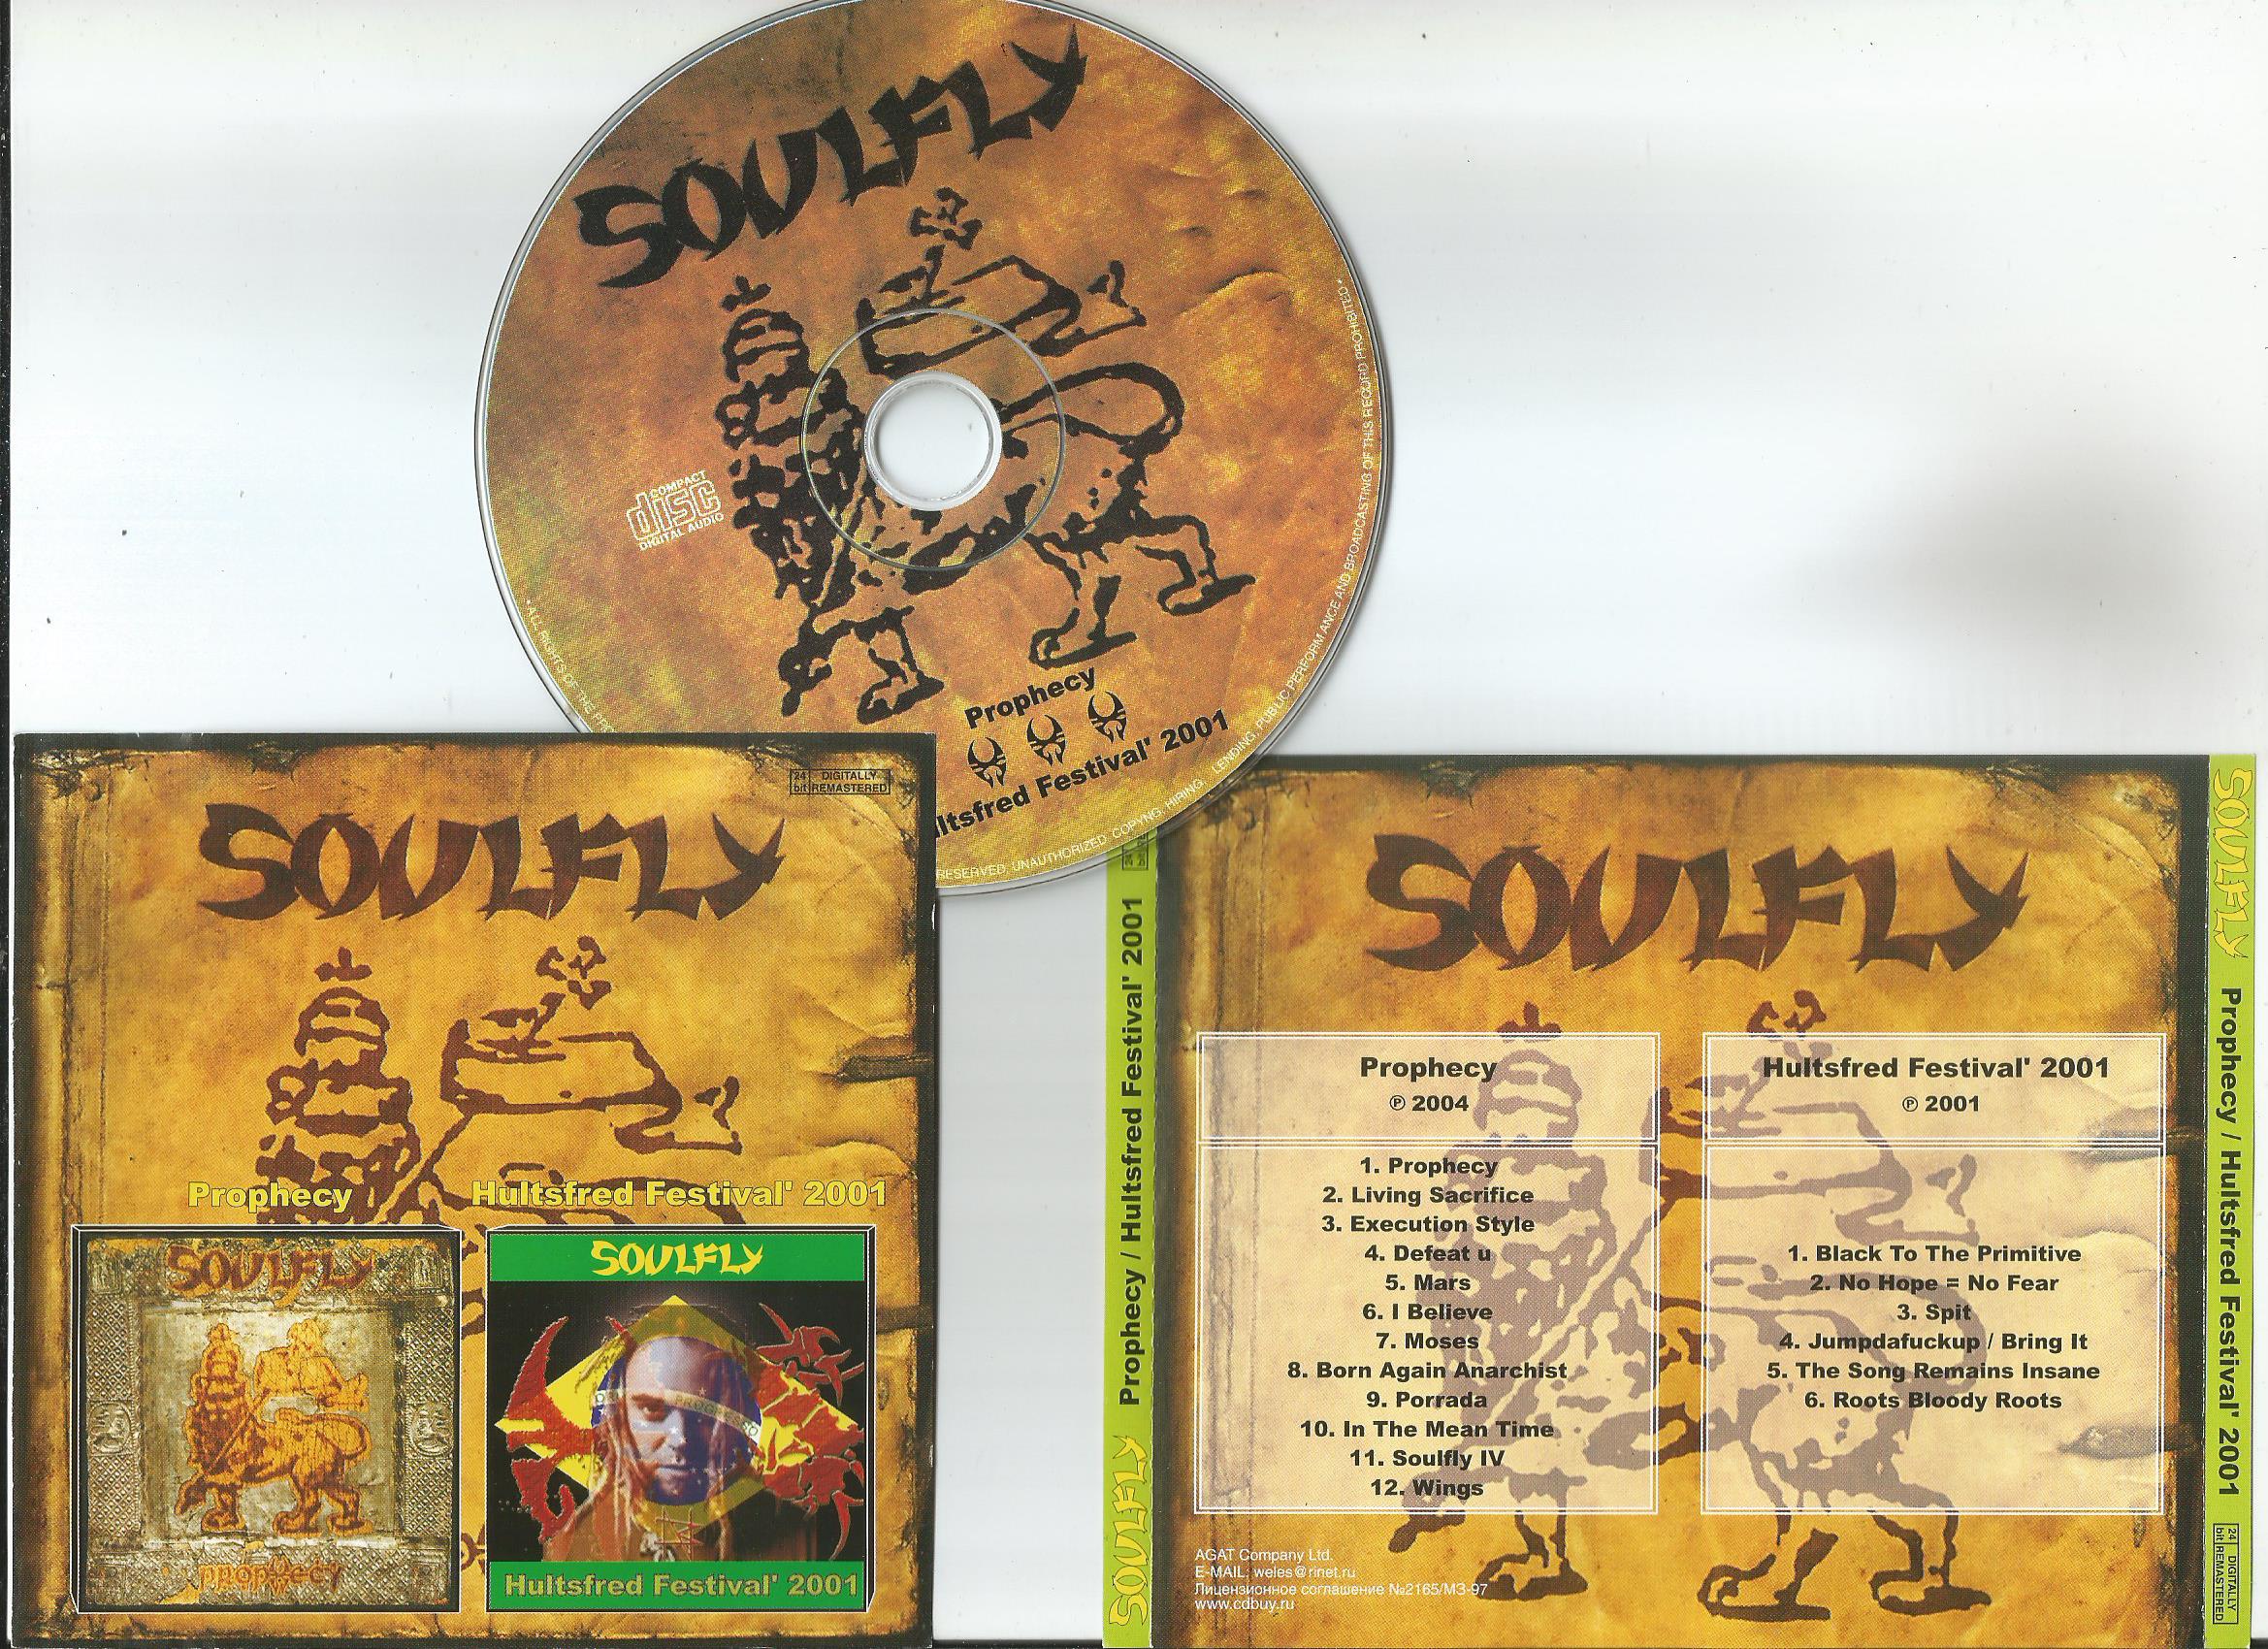 Prophecy перевод. Soulfly 2004 Prophecy. Soulfly Primitive 2000. Soulfly - (1998) Soulfly Vinyl. Soulfly Special Limited Edition.